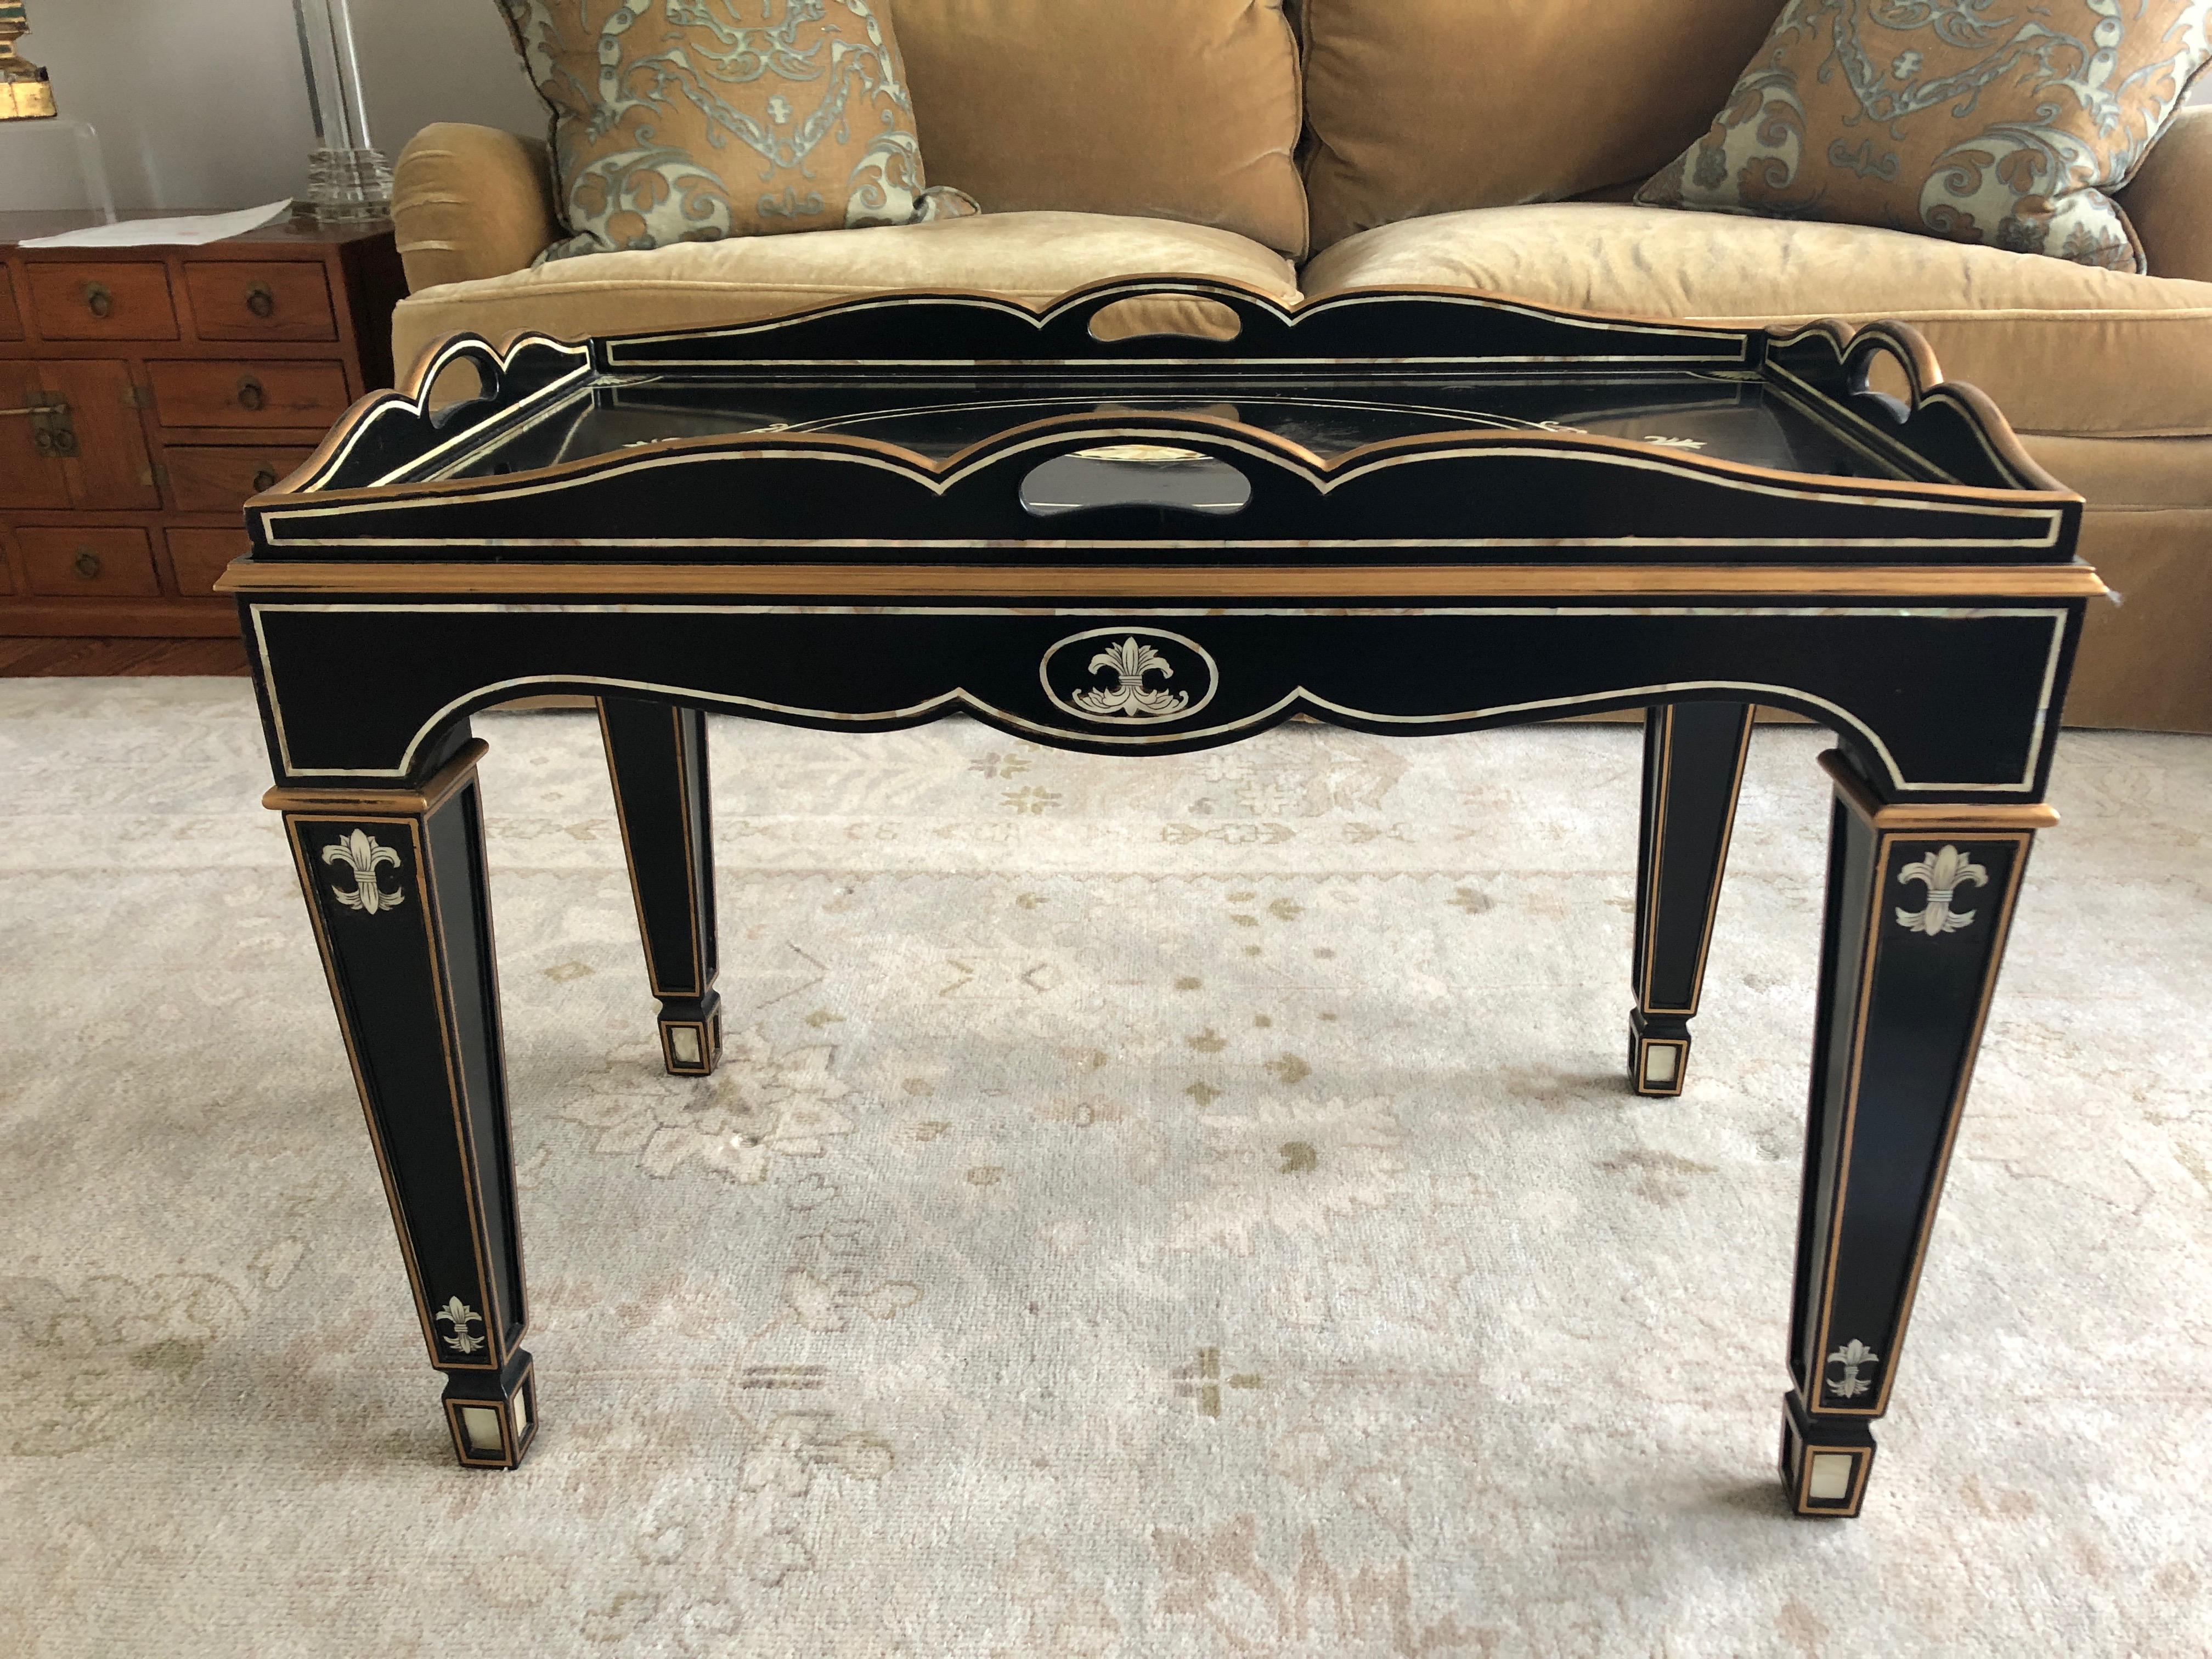 Very elegant small rectangular tray coffee table having a black background and gorgeous mother of pearl and gold decoration including inlay central medallion, border and corner embellishments and fleur di lis like designs on the tapered legs,